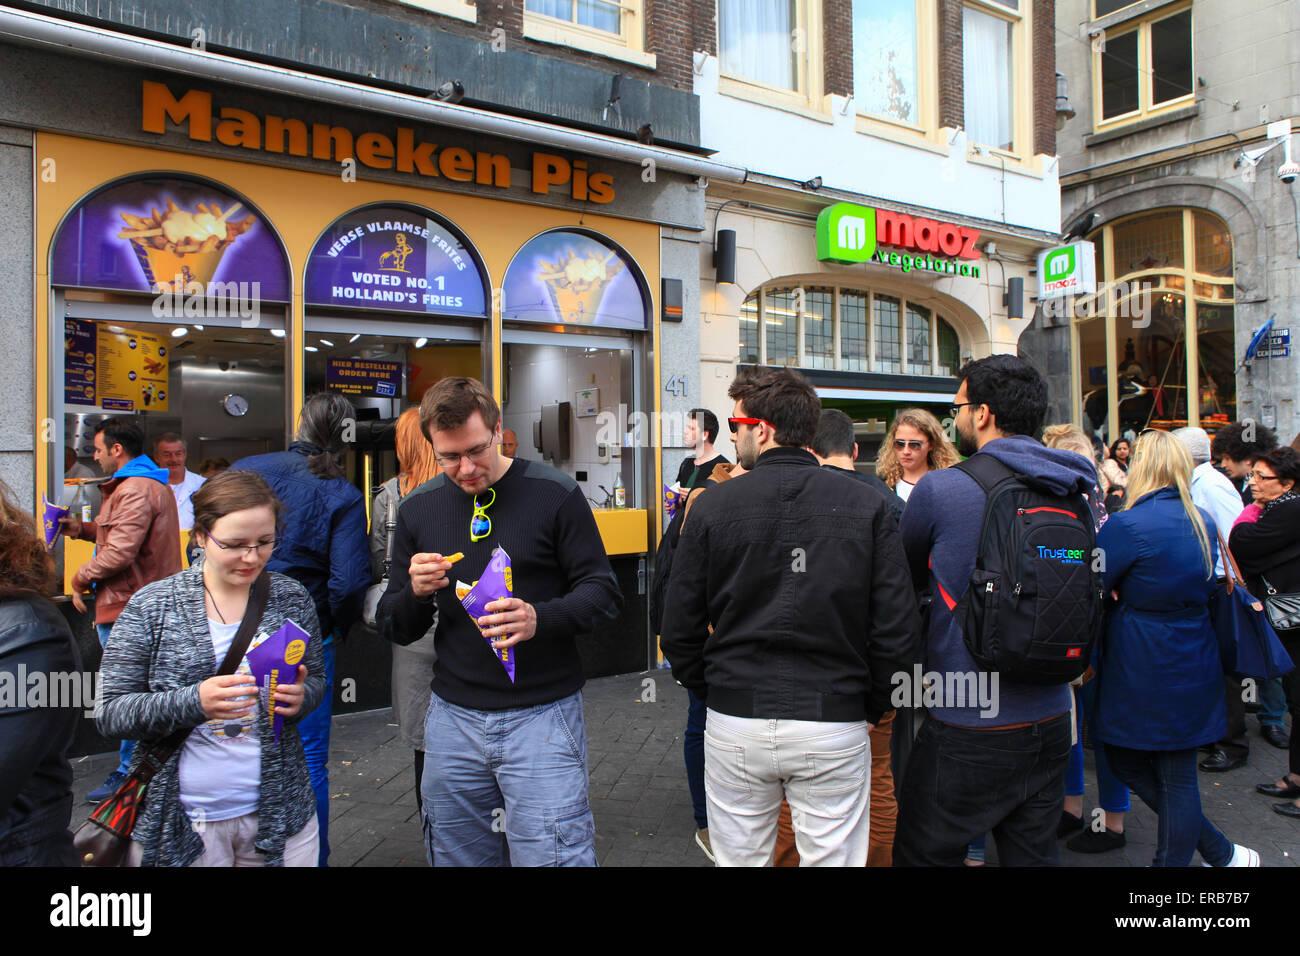 Locals and tourist at Amsterdam's famous Manneken pis dutch fries fast food shop. Stock Photo